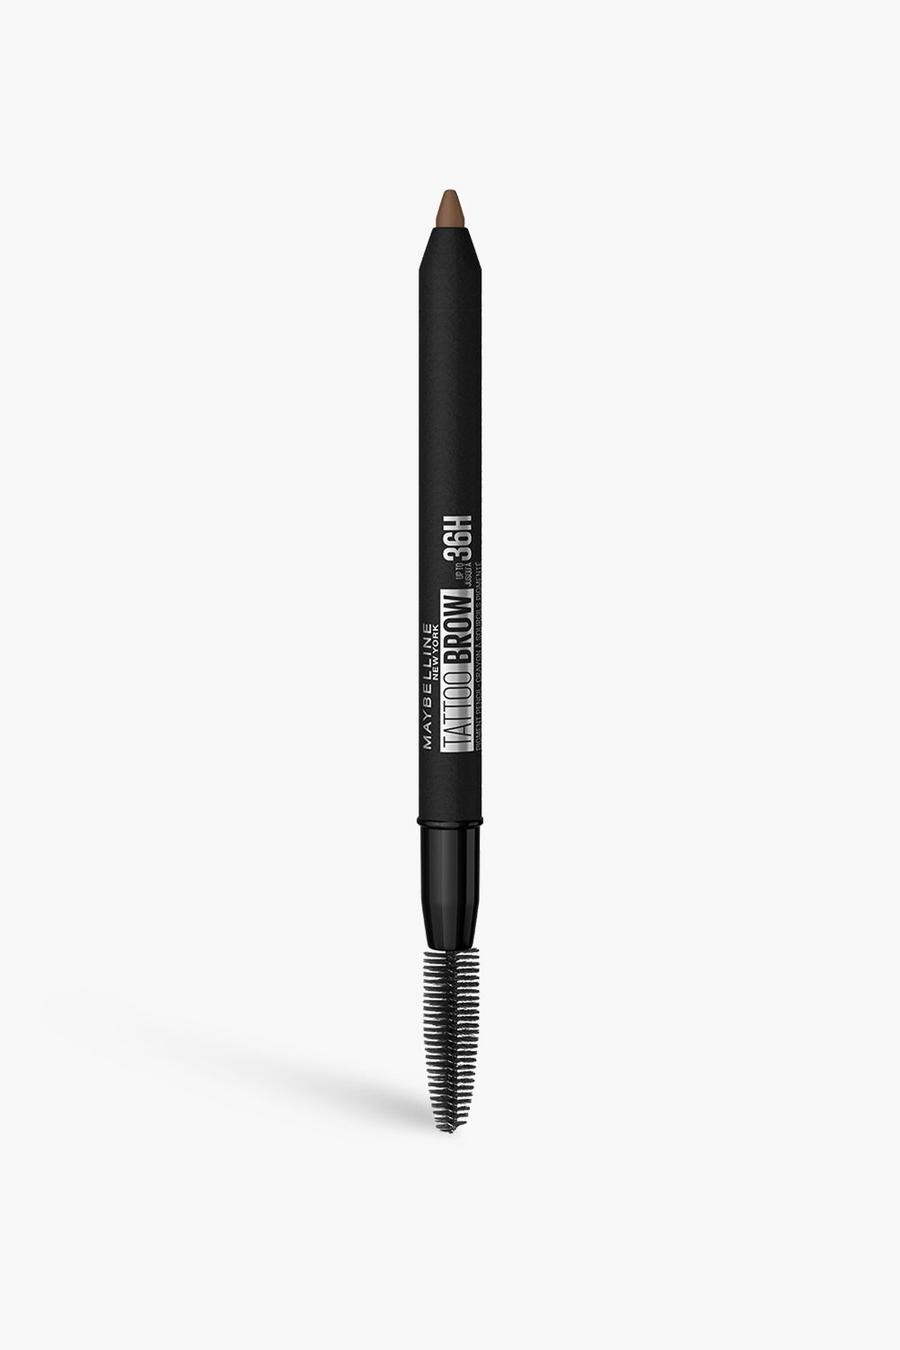 Maybelline Tattoo Brow Semi Perm Ögonbrynspenna - Soft Brown 3 image number 1